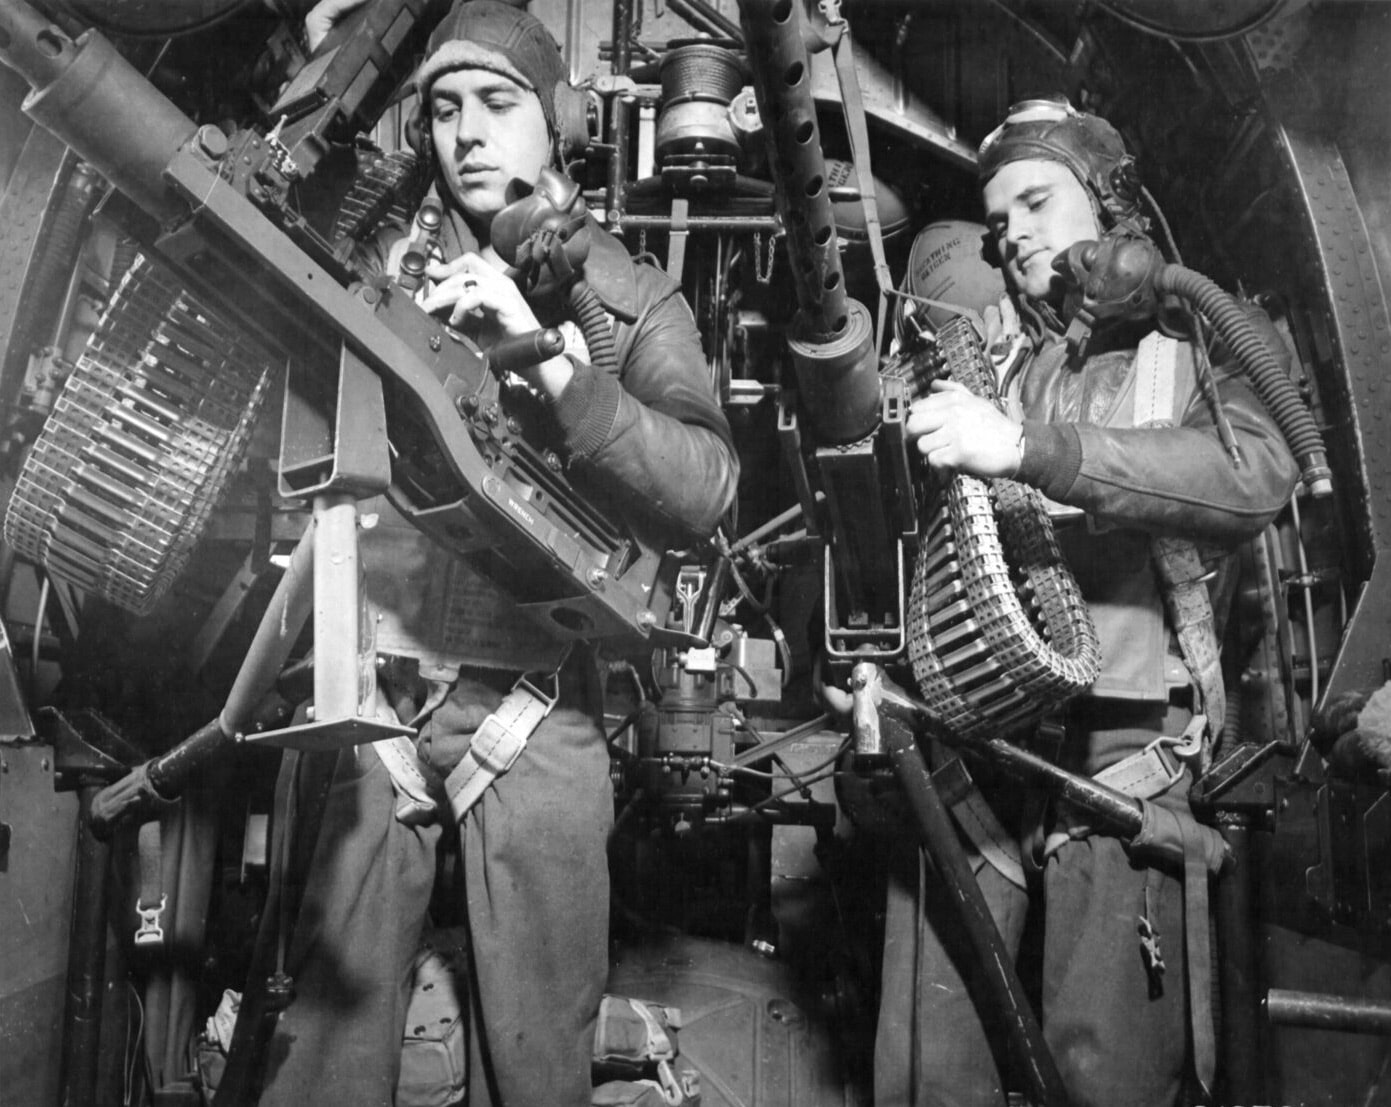 50 cal waist gunners in B-24 during WWII